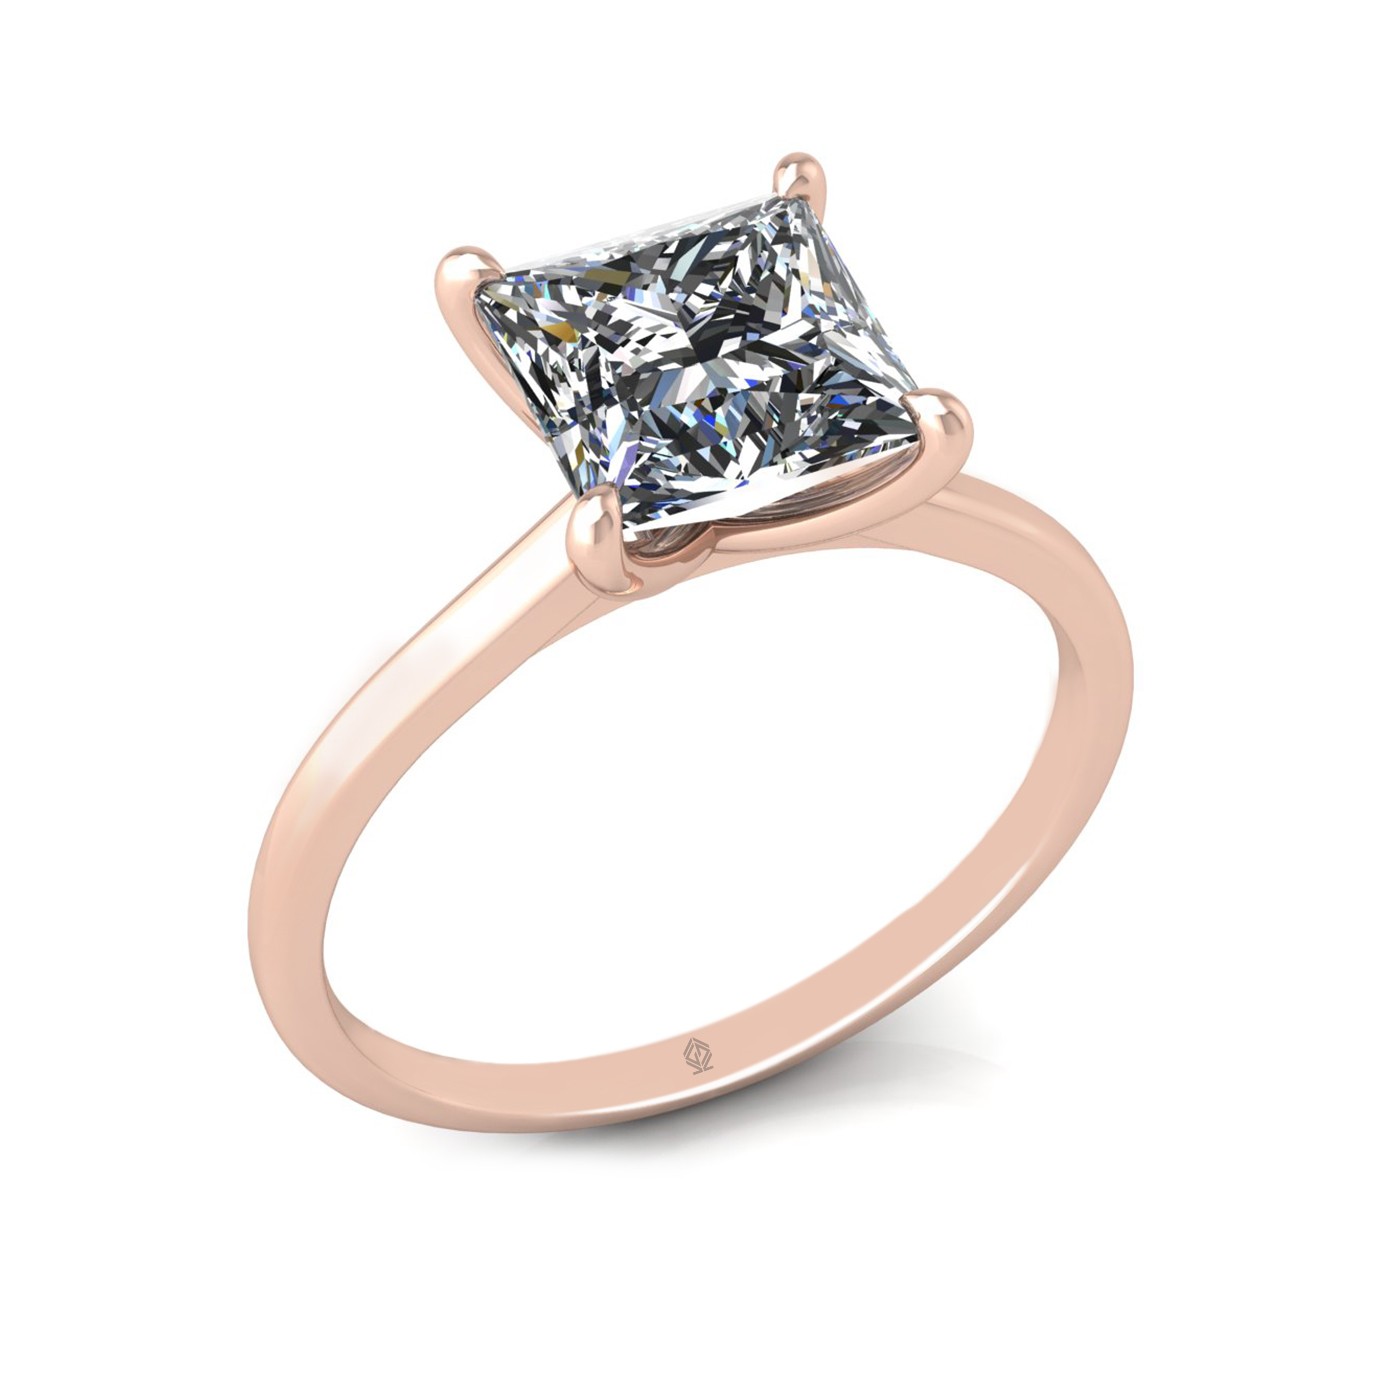 18k rose gold  2,00 ct 4 prongs solitaire princess cut diamond engagement ring with whisper thin band